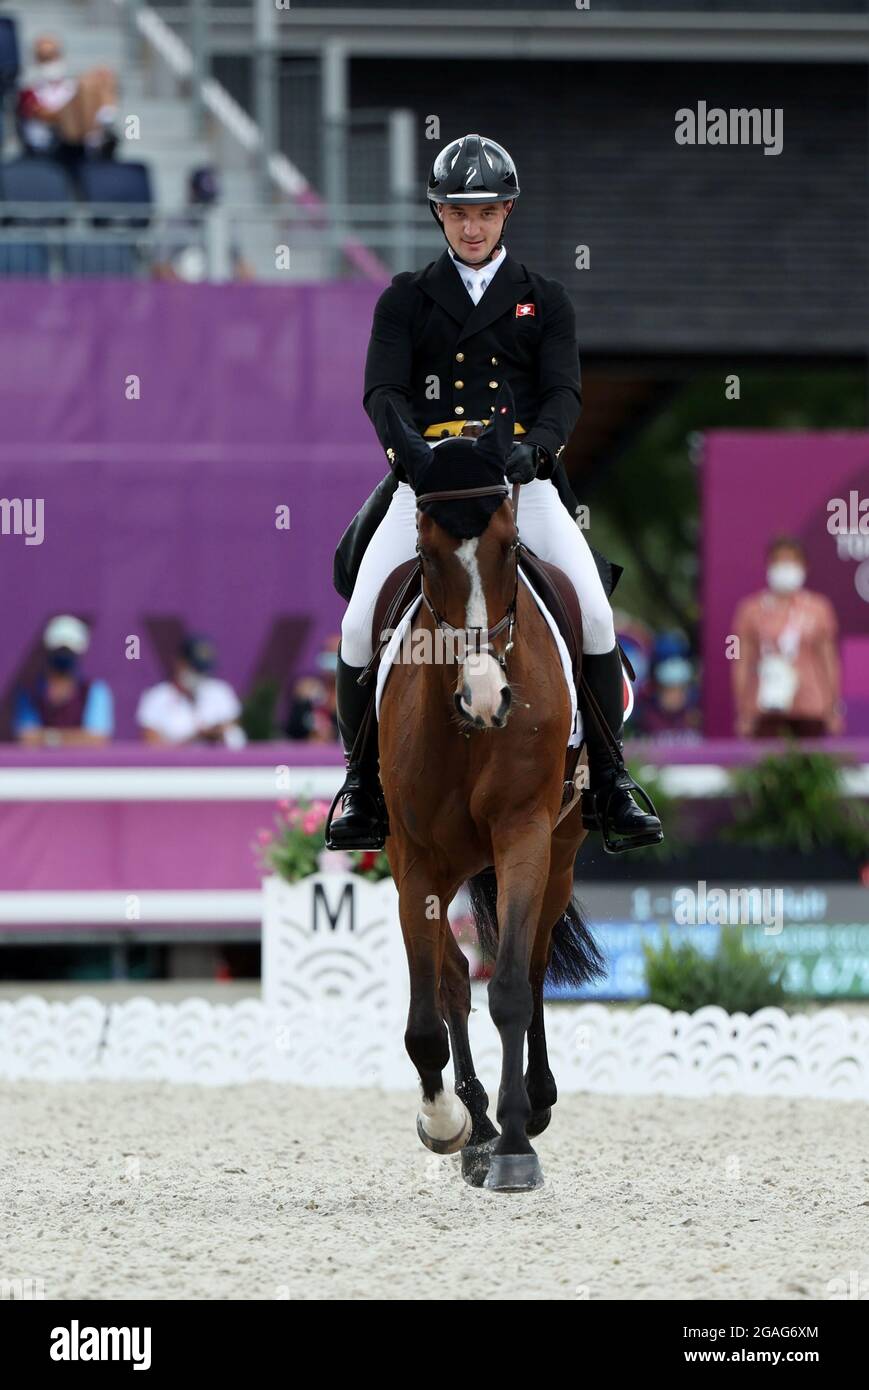 Tokyo 2020 Olympics - Equestrian - Eventing - Dressage Individual - Day 2 - Equestrian Park - Tokyo, Japan - July 31, 2021.  Robin Godel of Switzerland on his horse Jet Set compete REUTERS/Alkis Konstantinidis Stock Photo